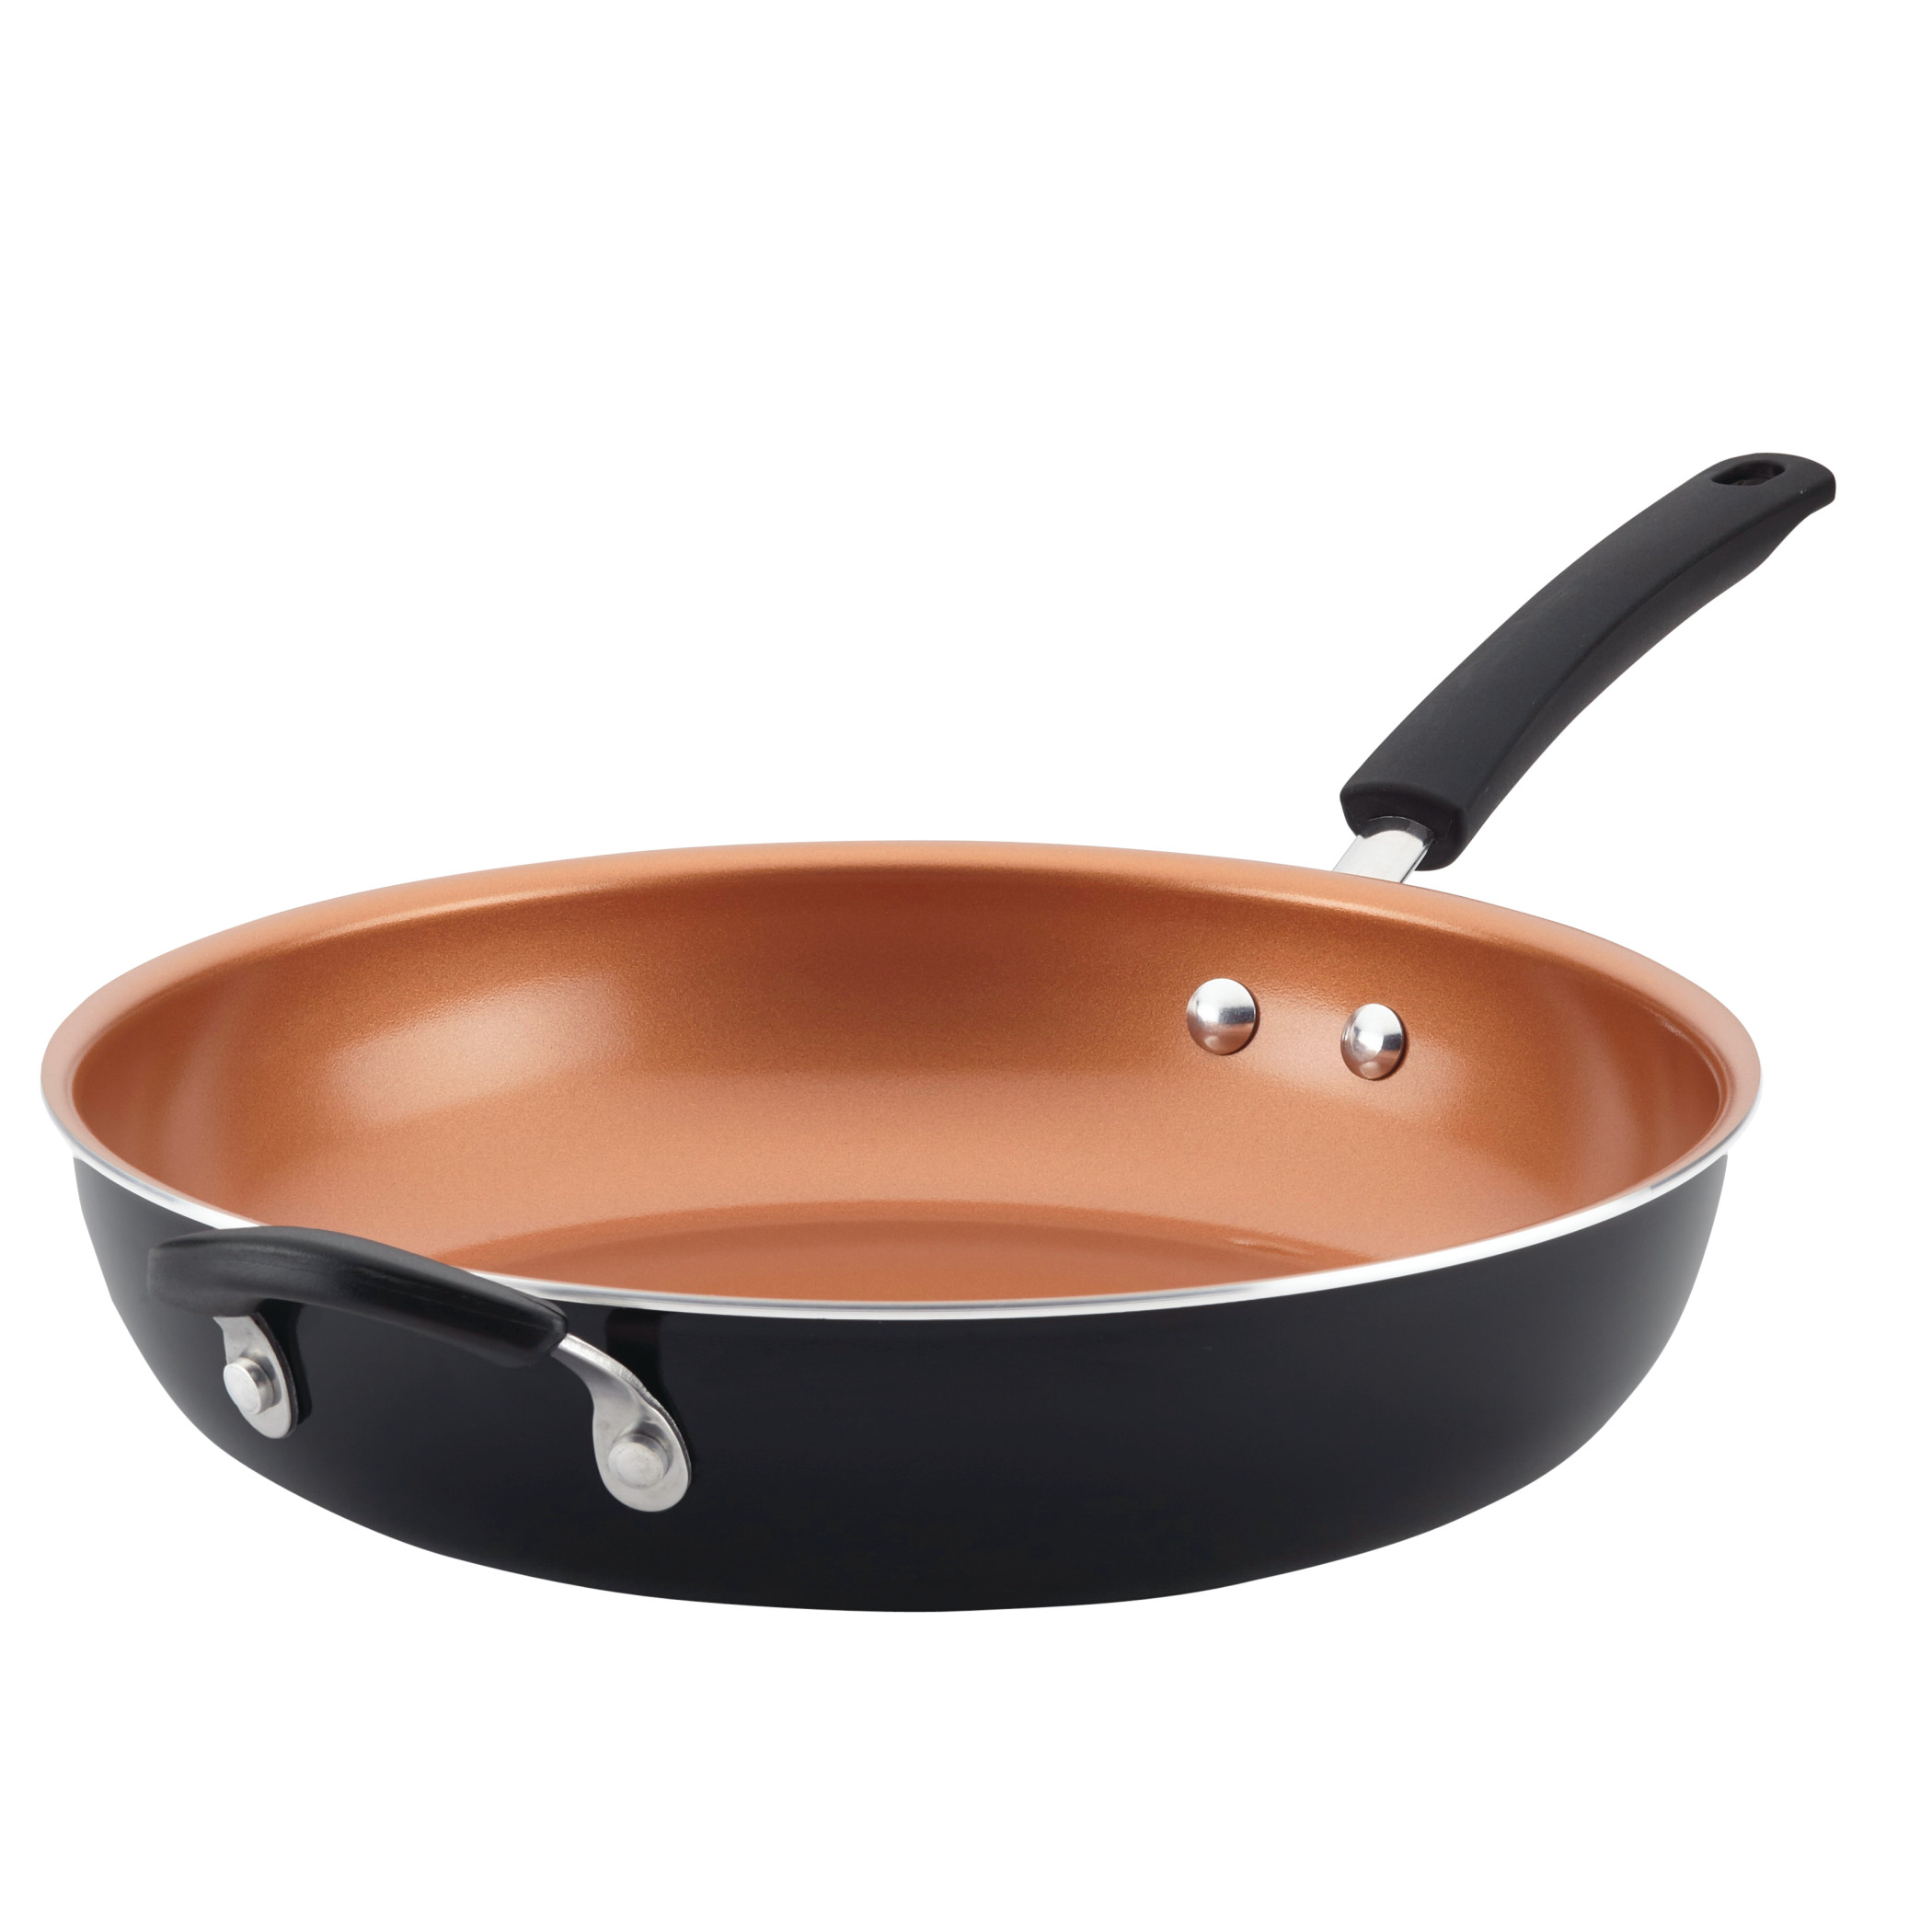 Farberware 12.5" Easy Clean Pro Non-Stick Skillet with Helper Handle, Black - image 1 of 14